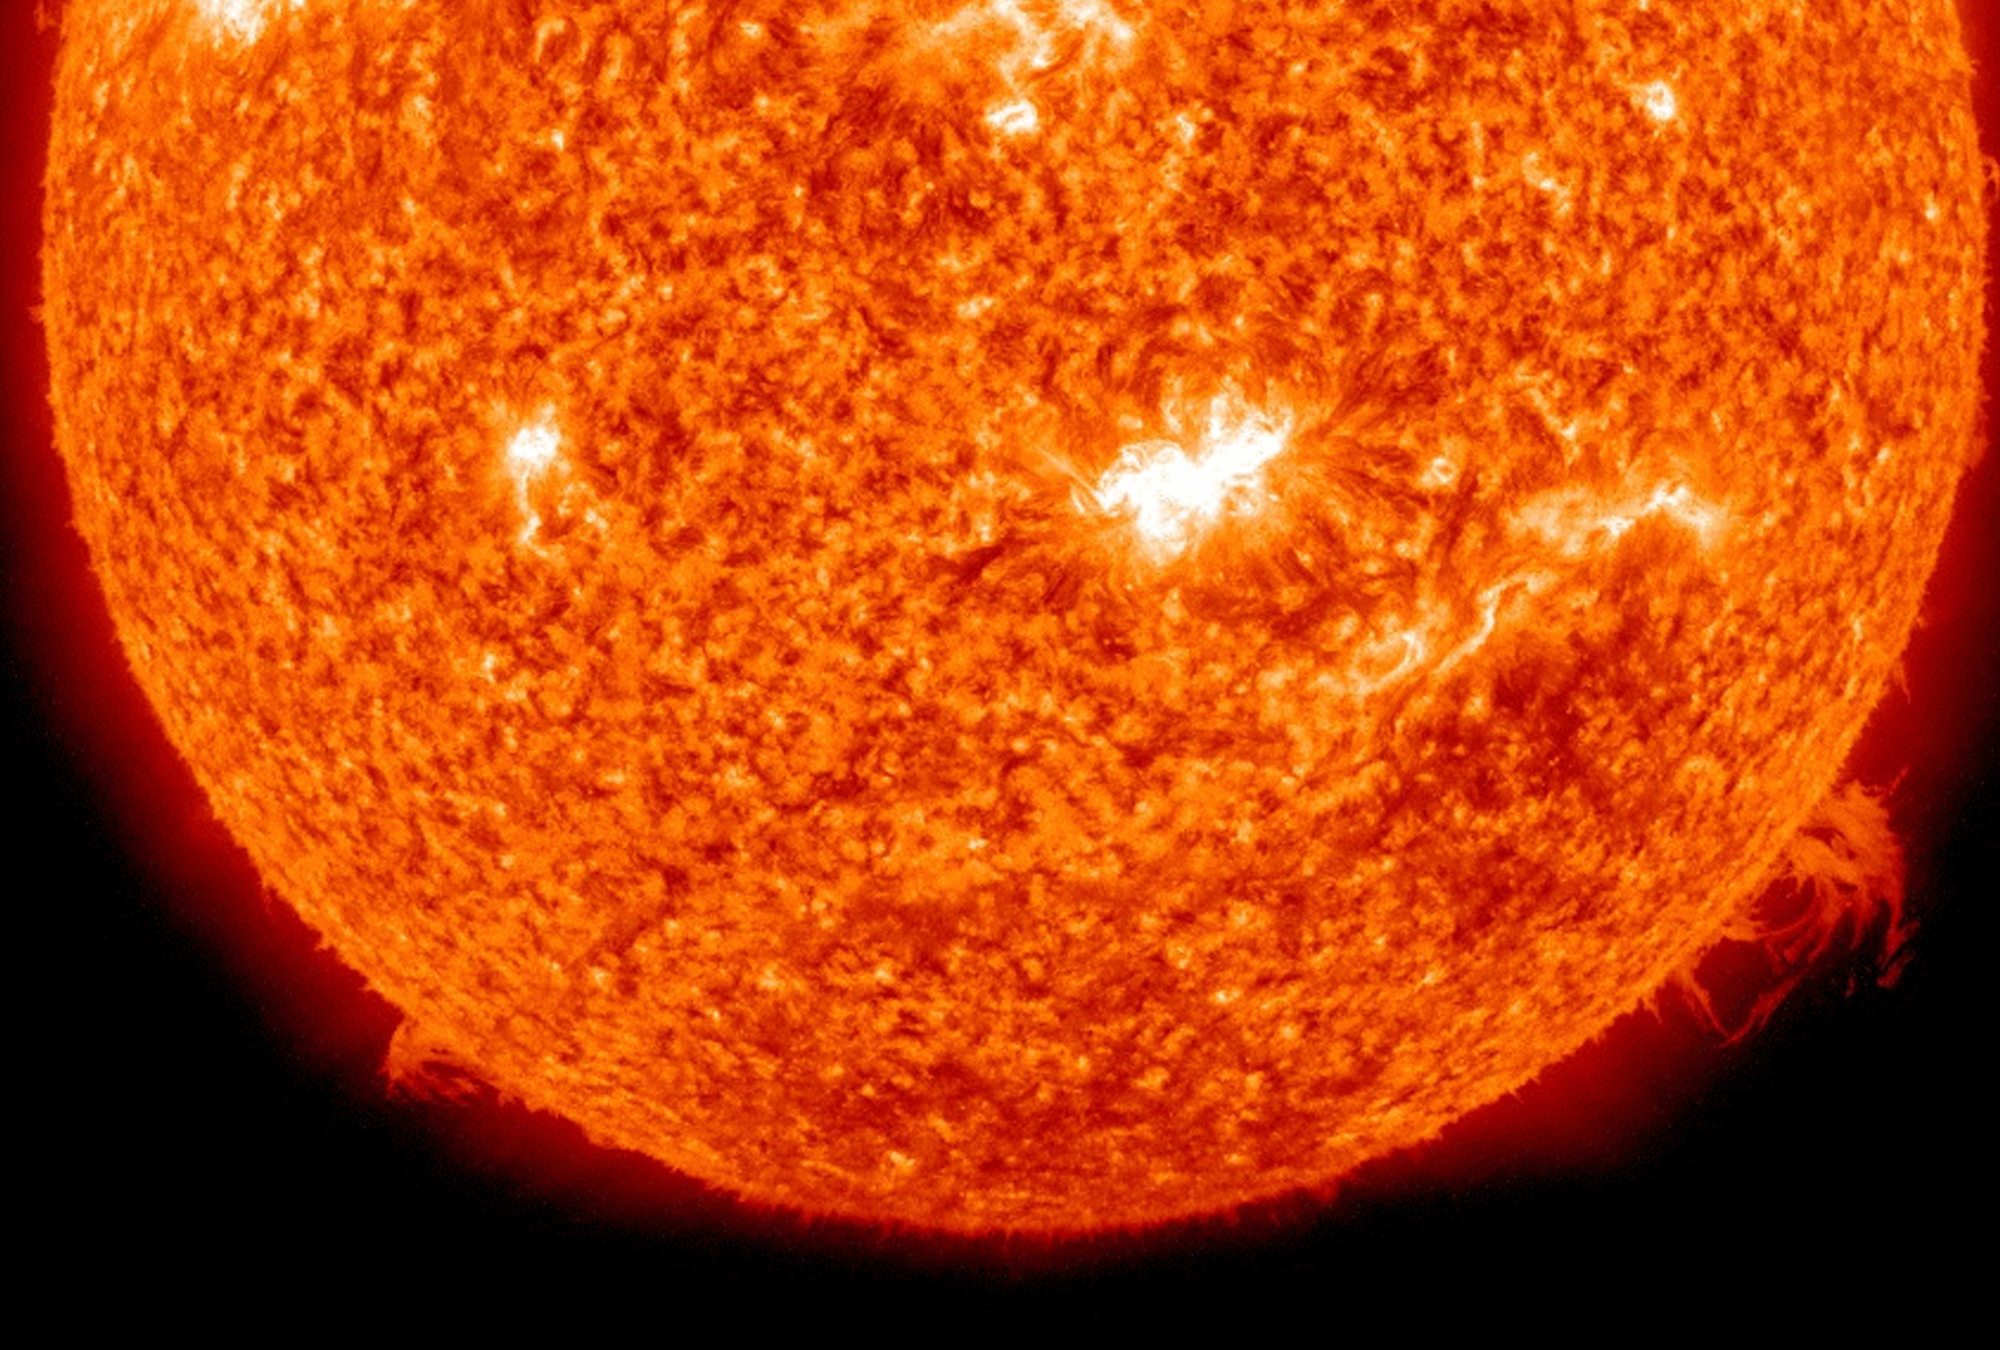 The National Weather Service is monitoring “large” solar flares.